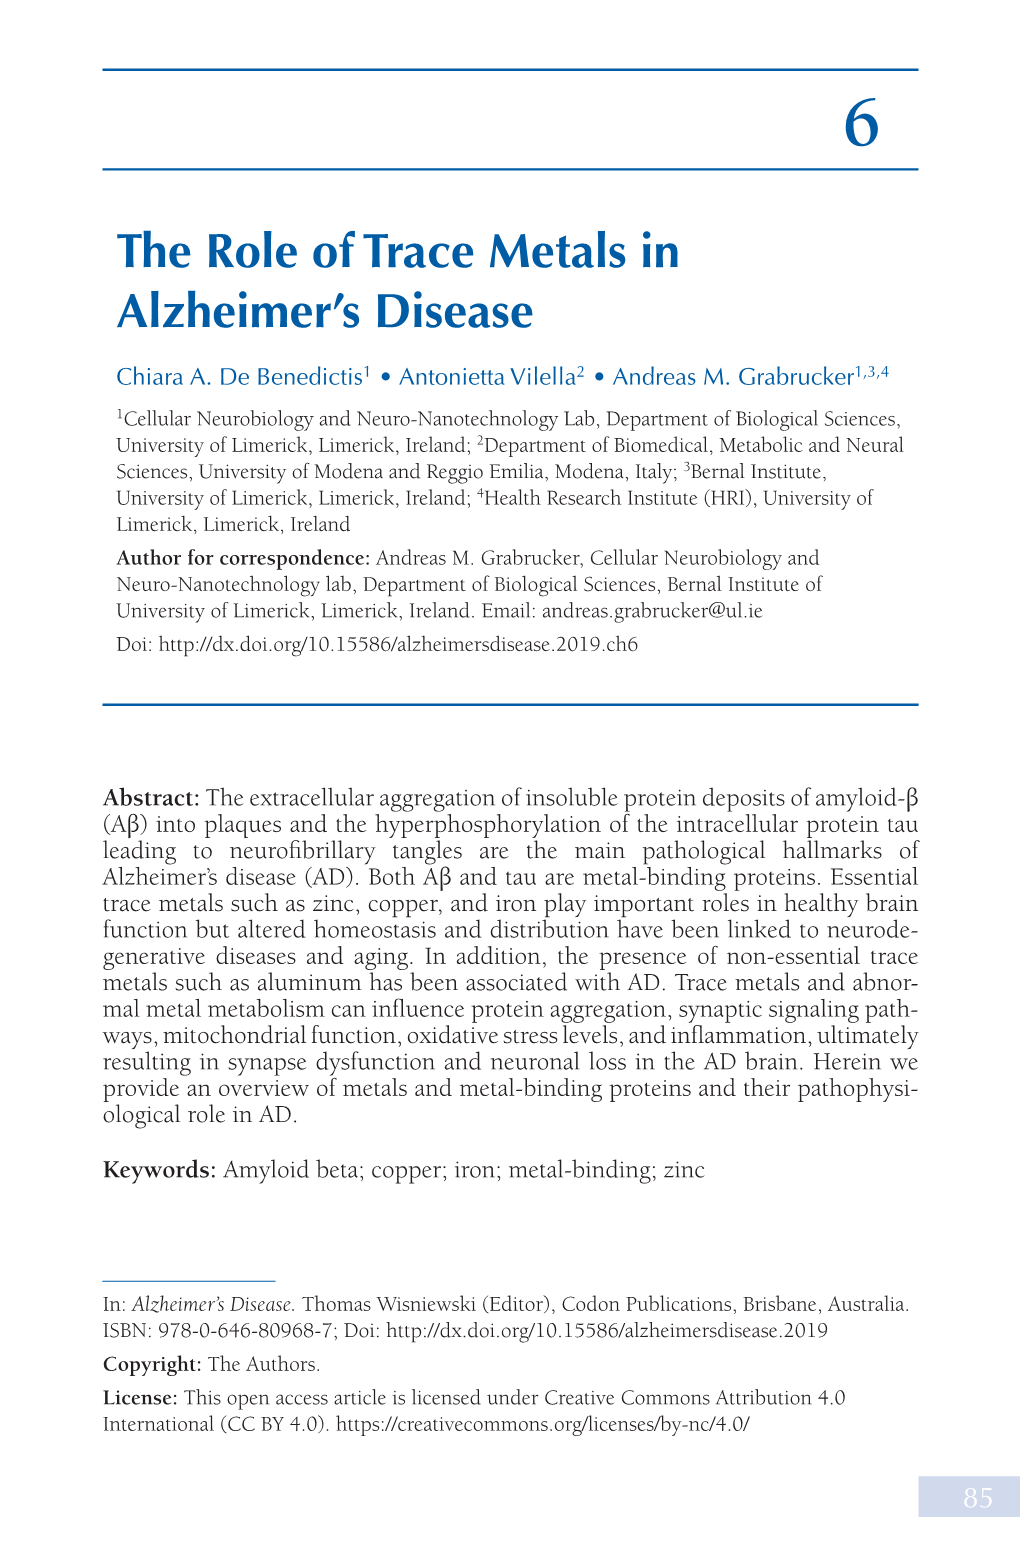 The Role of Trace Metals in Alzheimer's Disease